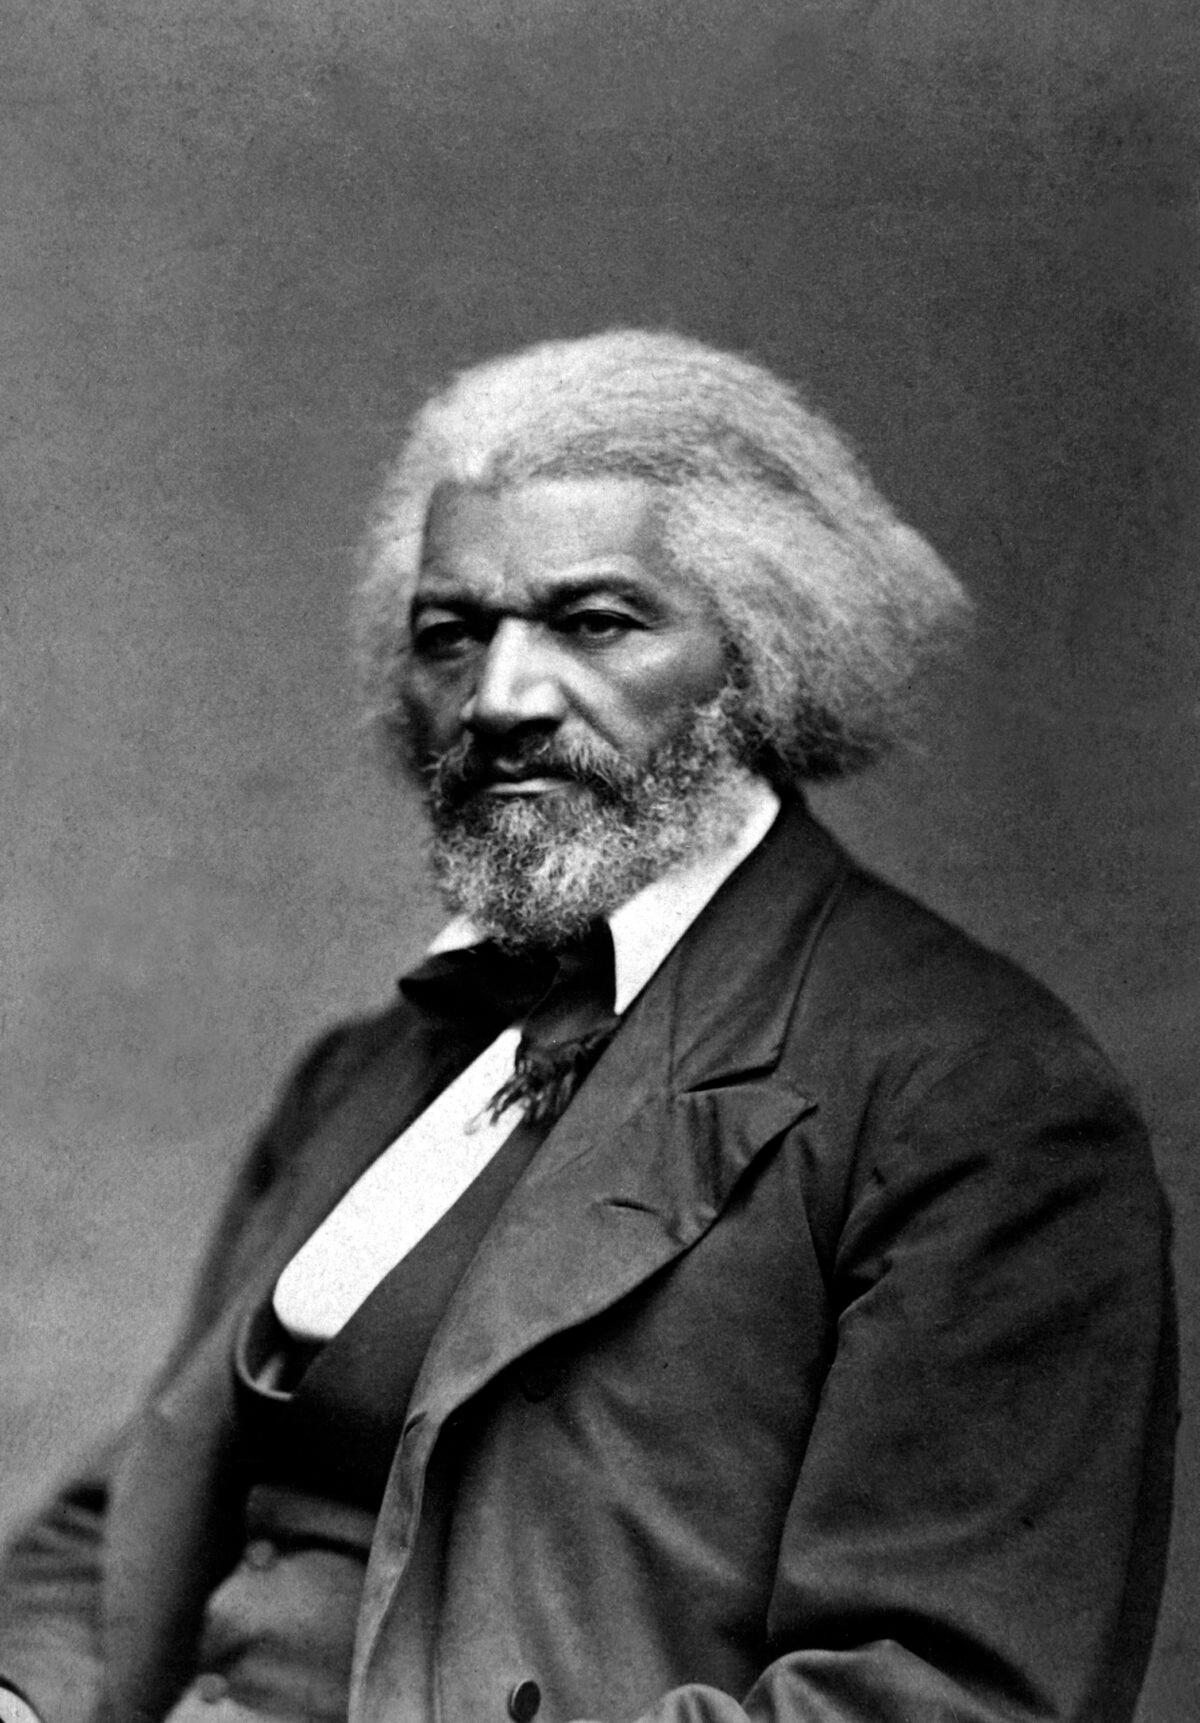 American social reformer, orator, writer, and statesman Frederick Douglass, circa 1879. National Archives and Records Administration. (Public Domain)